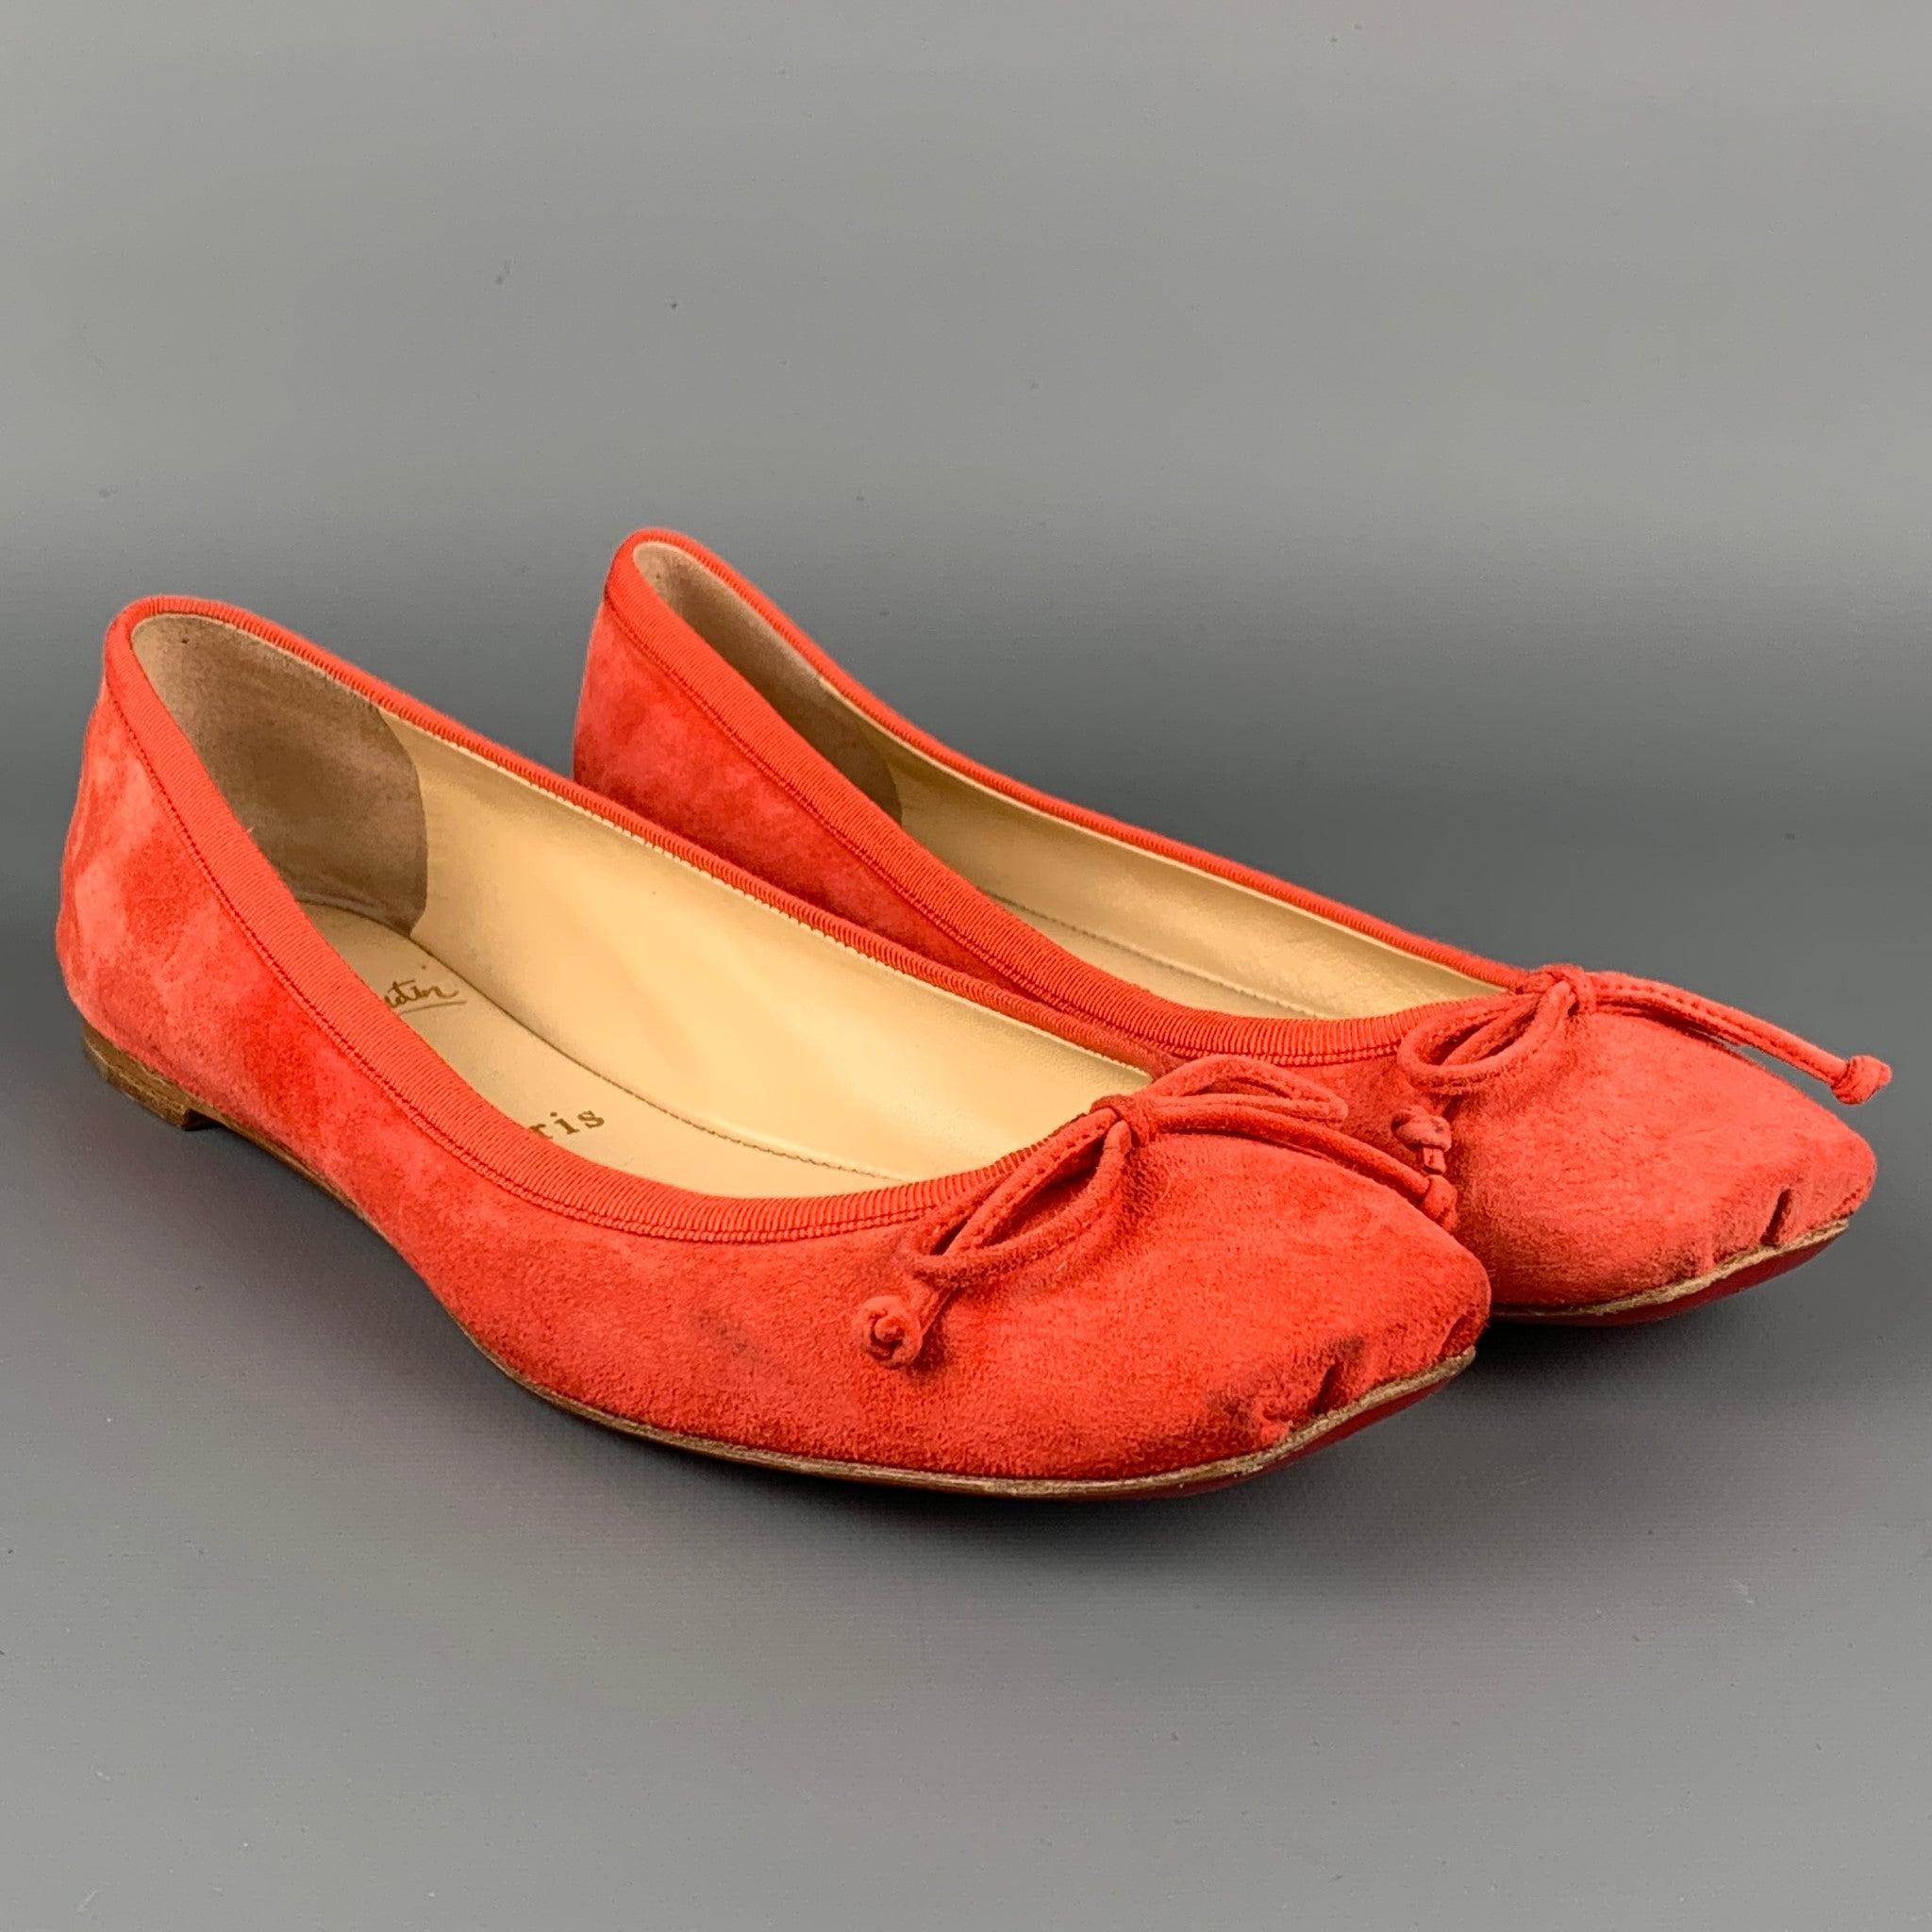 CHRISTIAN LOUBOUTIN flats comes in a coral suede featuring a ballet style, front bow details, and signature red sole. Made in Italy.
Good
Pre-Owned Condition. 

Marked:   36.5Outsole: 9.5 inches  x 3 inches 
  
  
 
Reference: 109574
Category: